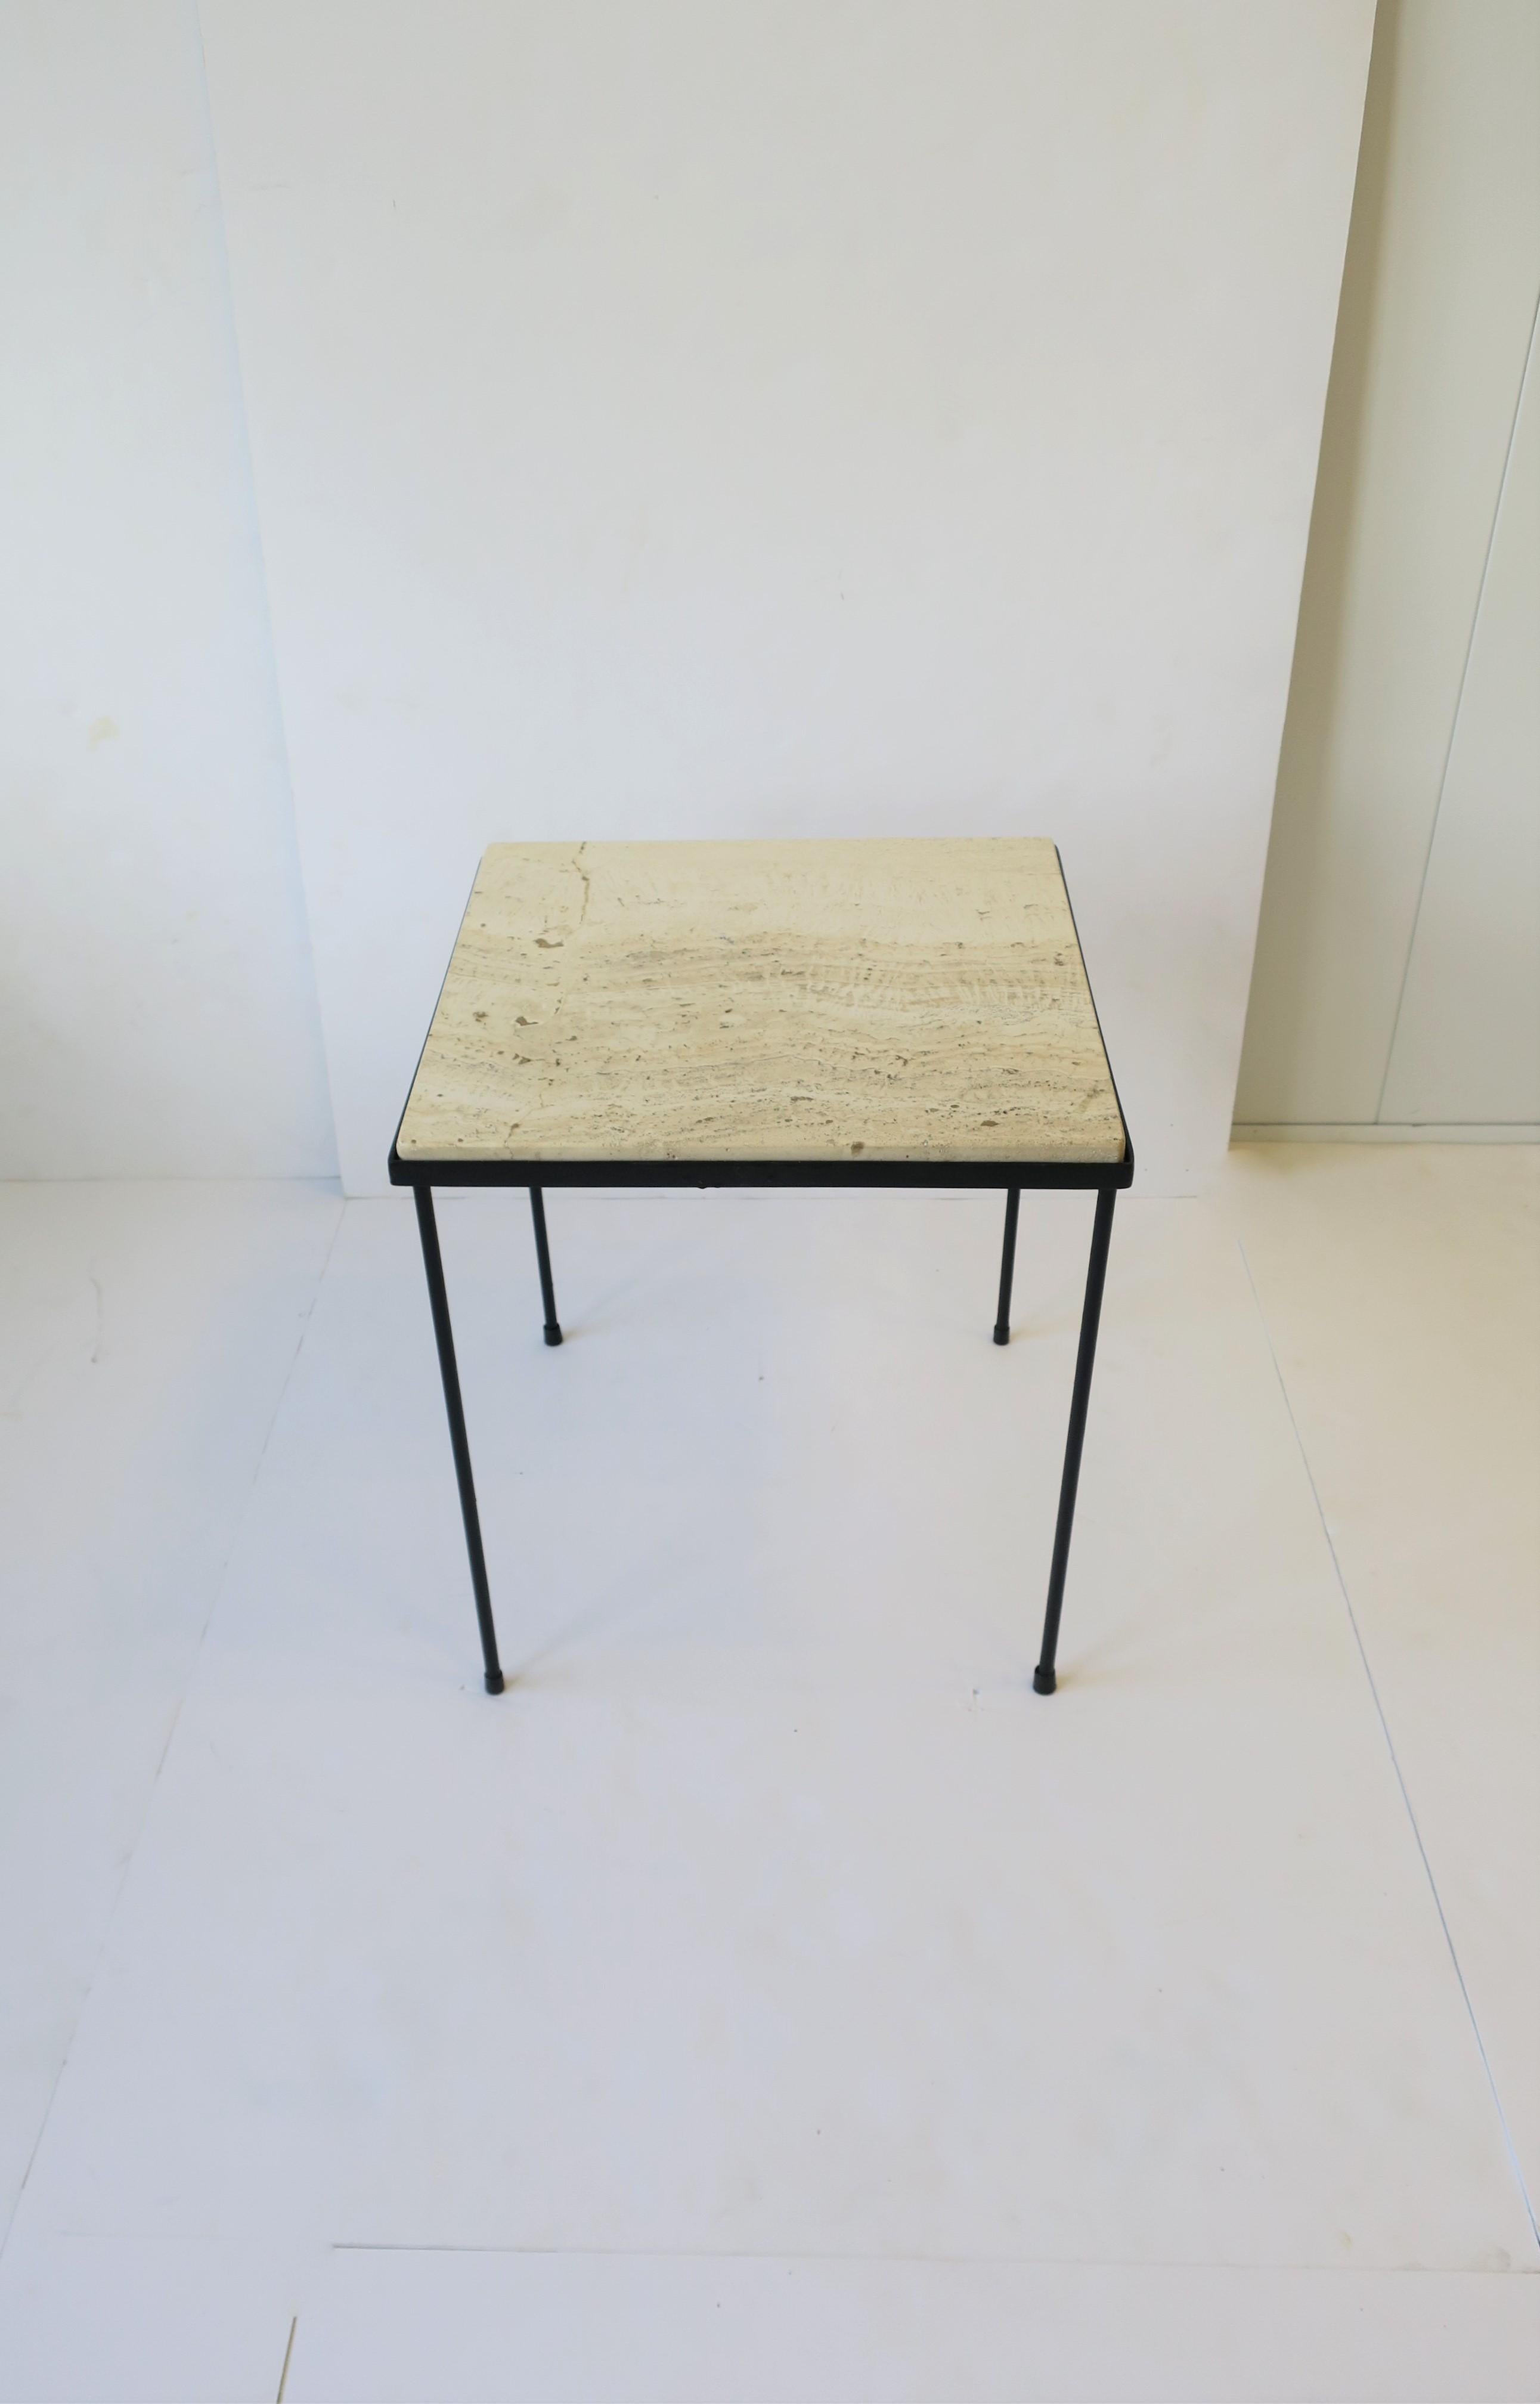 Minimalist Italian Travertine Marble and Black Metal Square Side or End Table